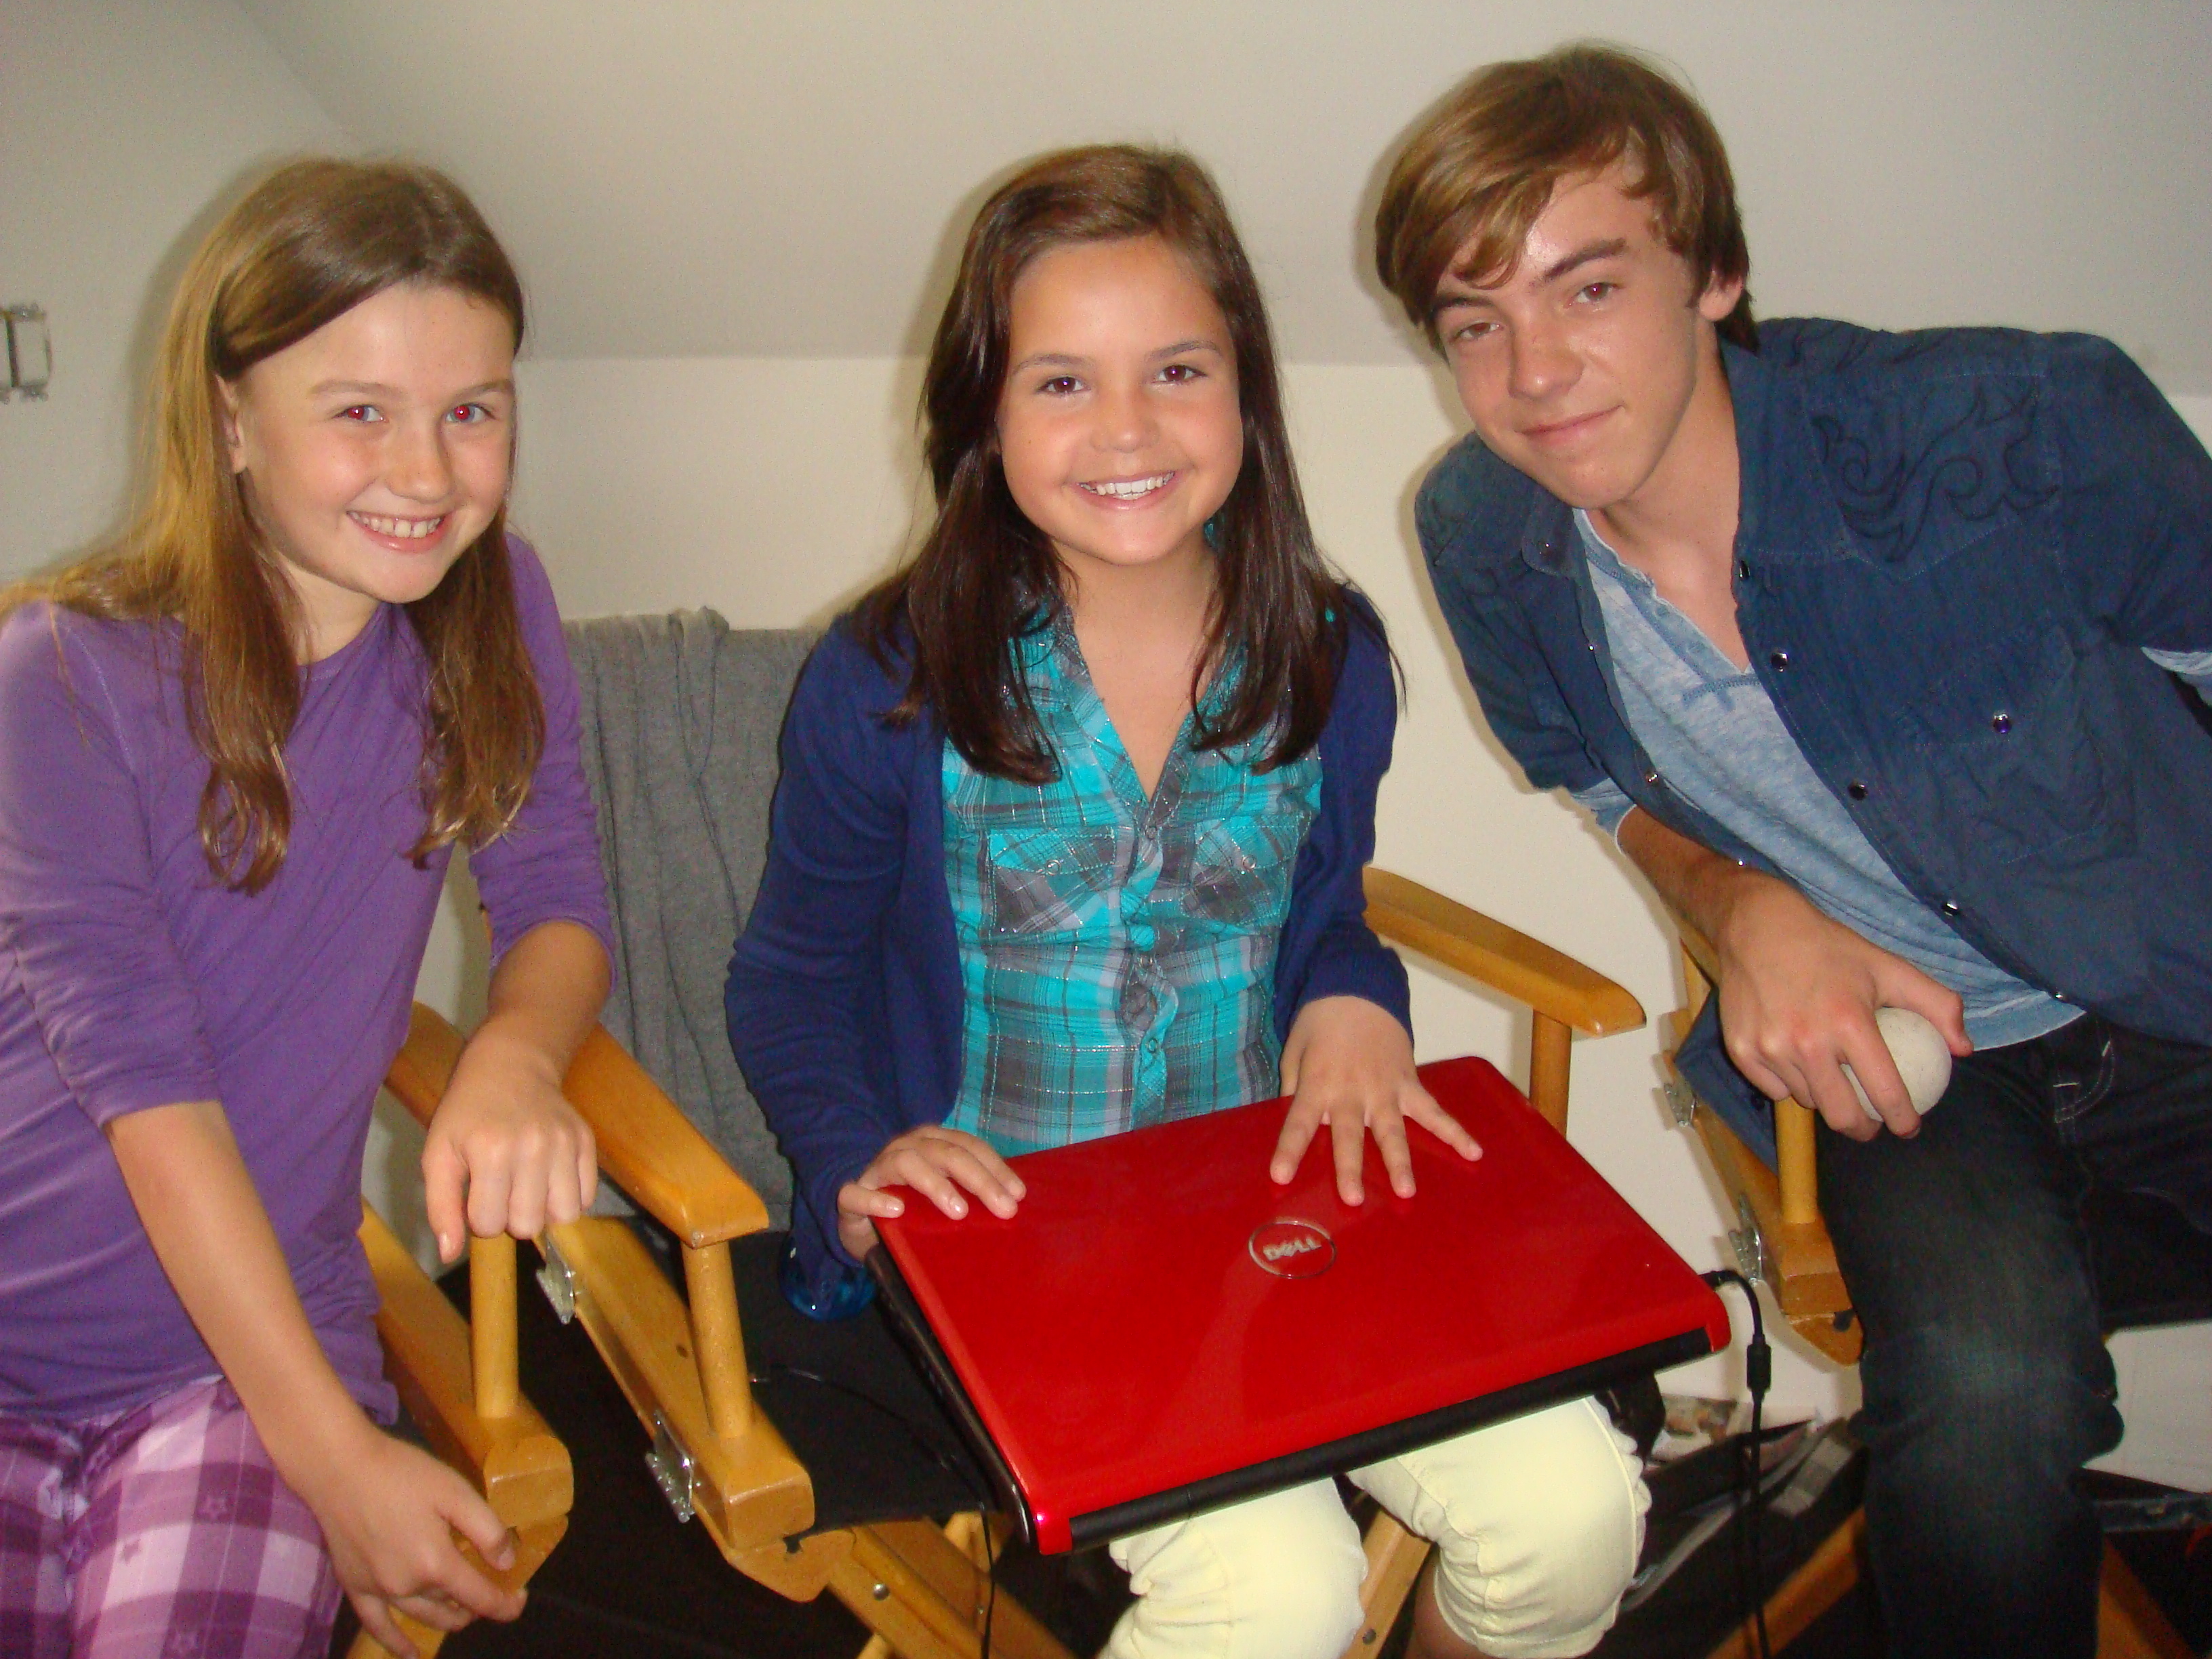 Haunting Hour, Vanessa with Bailee Madison, Connor Price